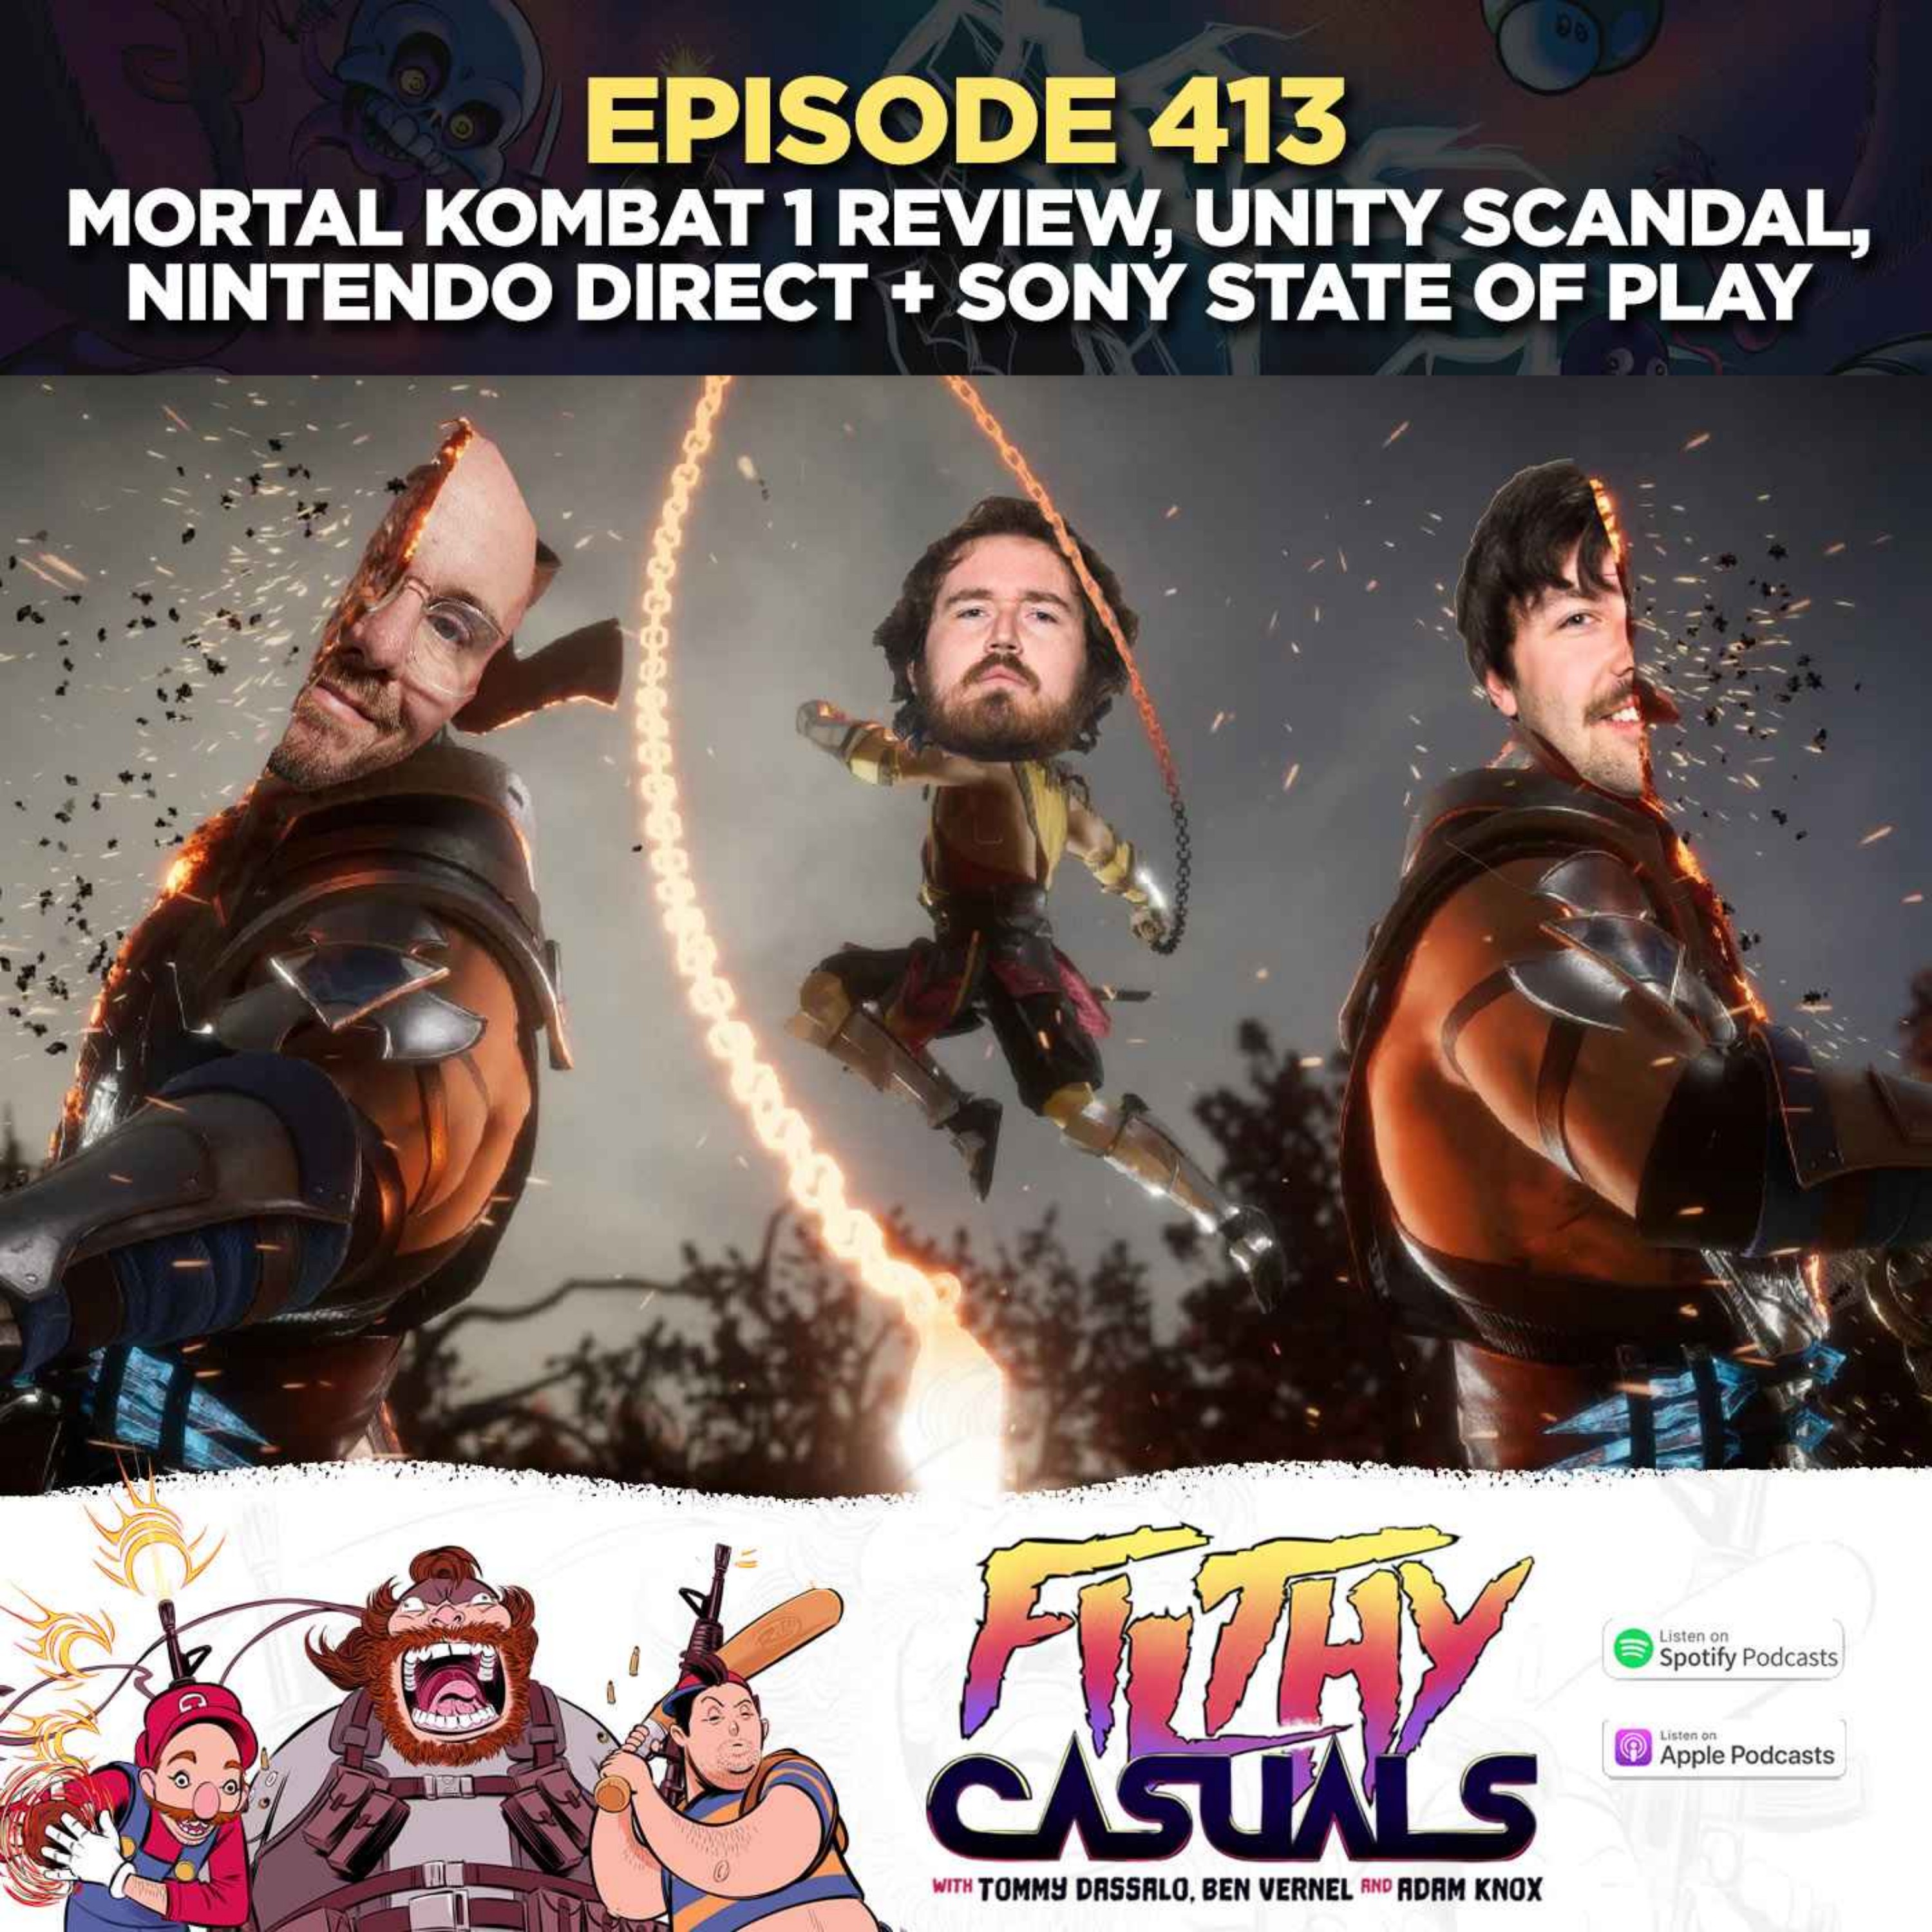 Episode 413: Mortal Kombat 1 Review, Unity, Nintendo Direct + Sony State Of Play